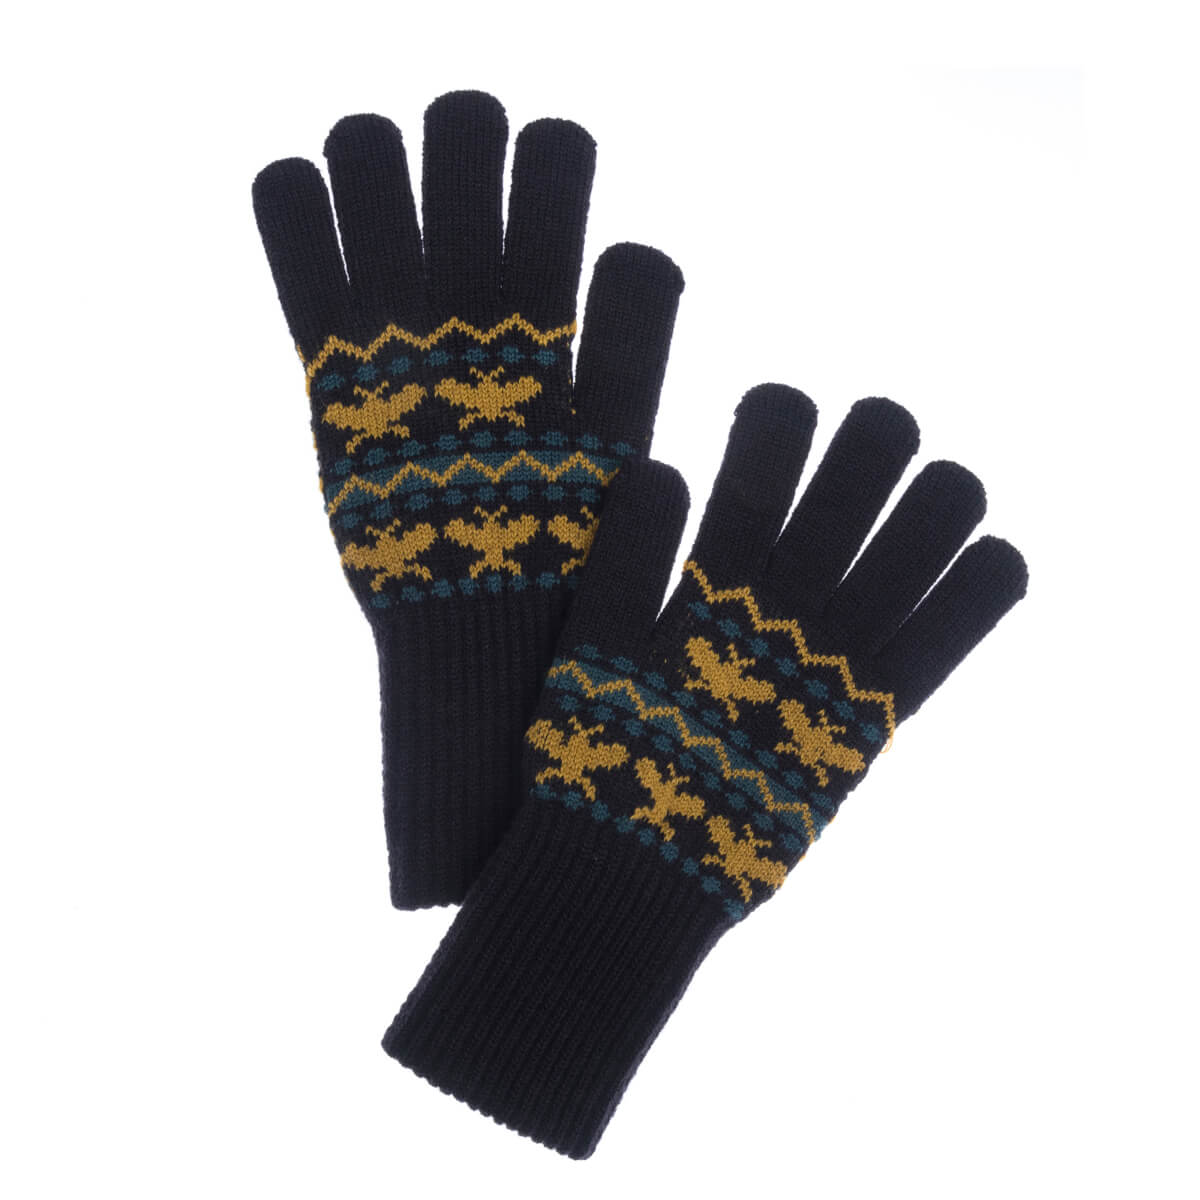 Bees Knitted Gloves